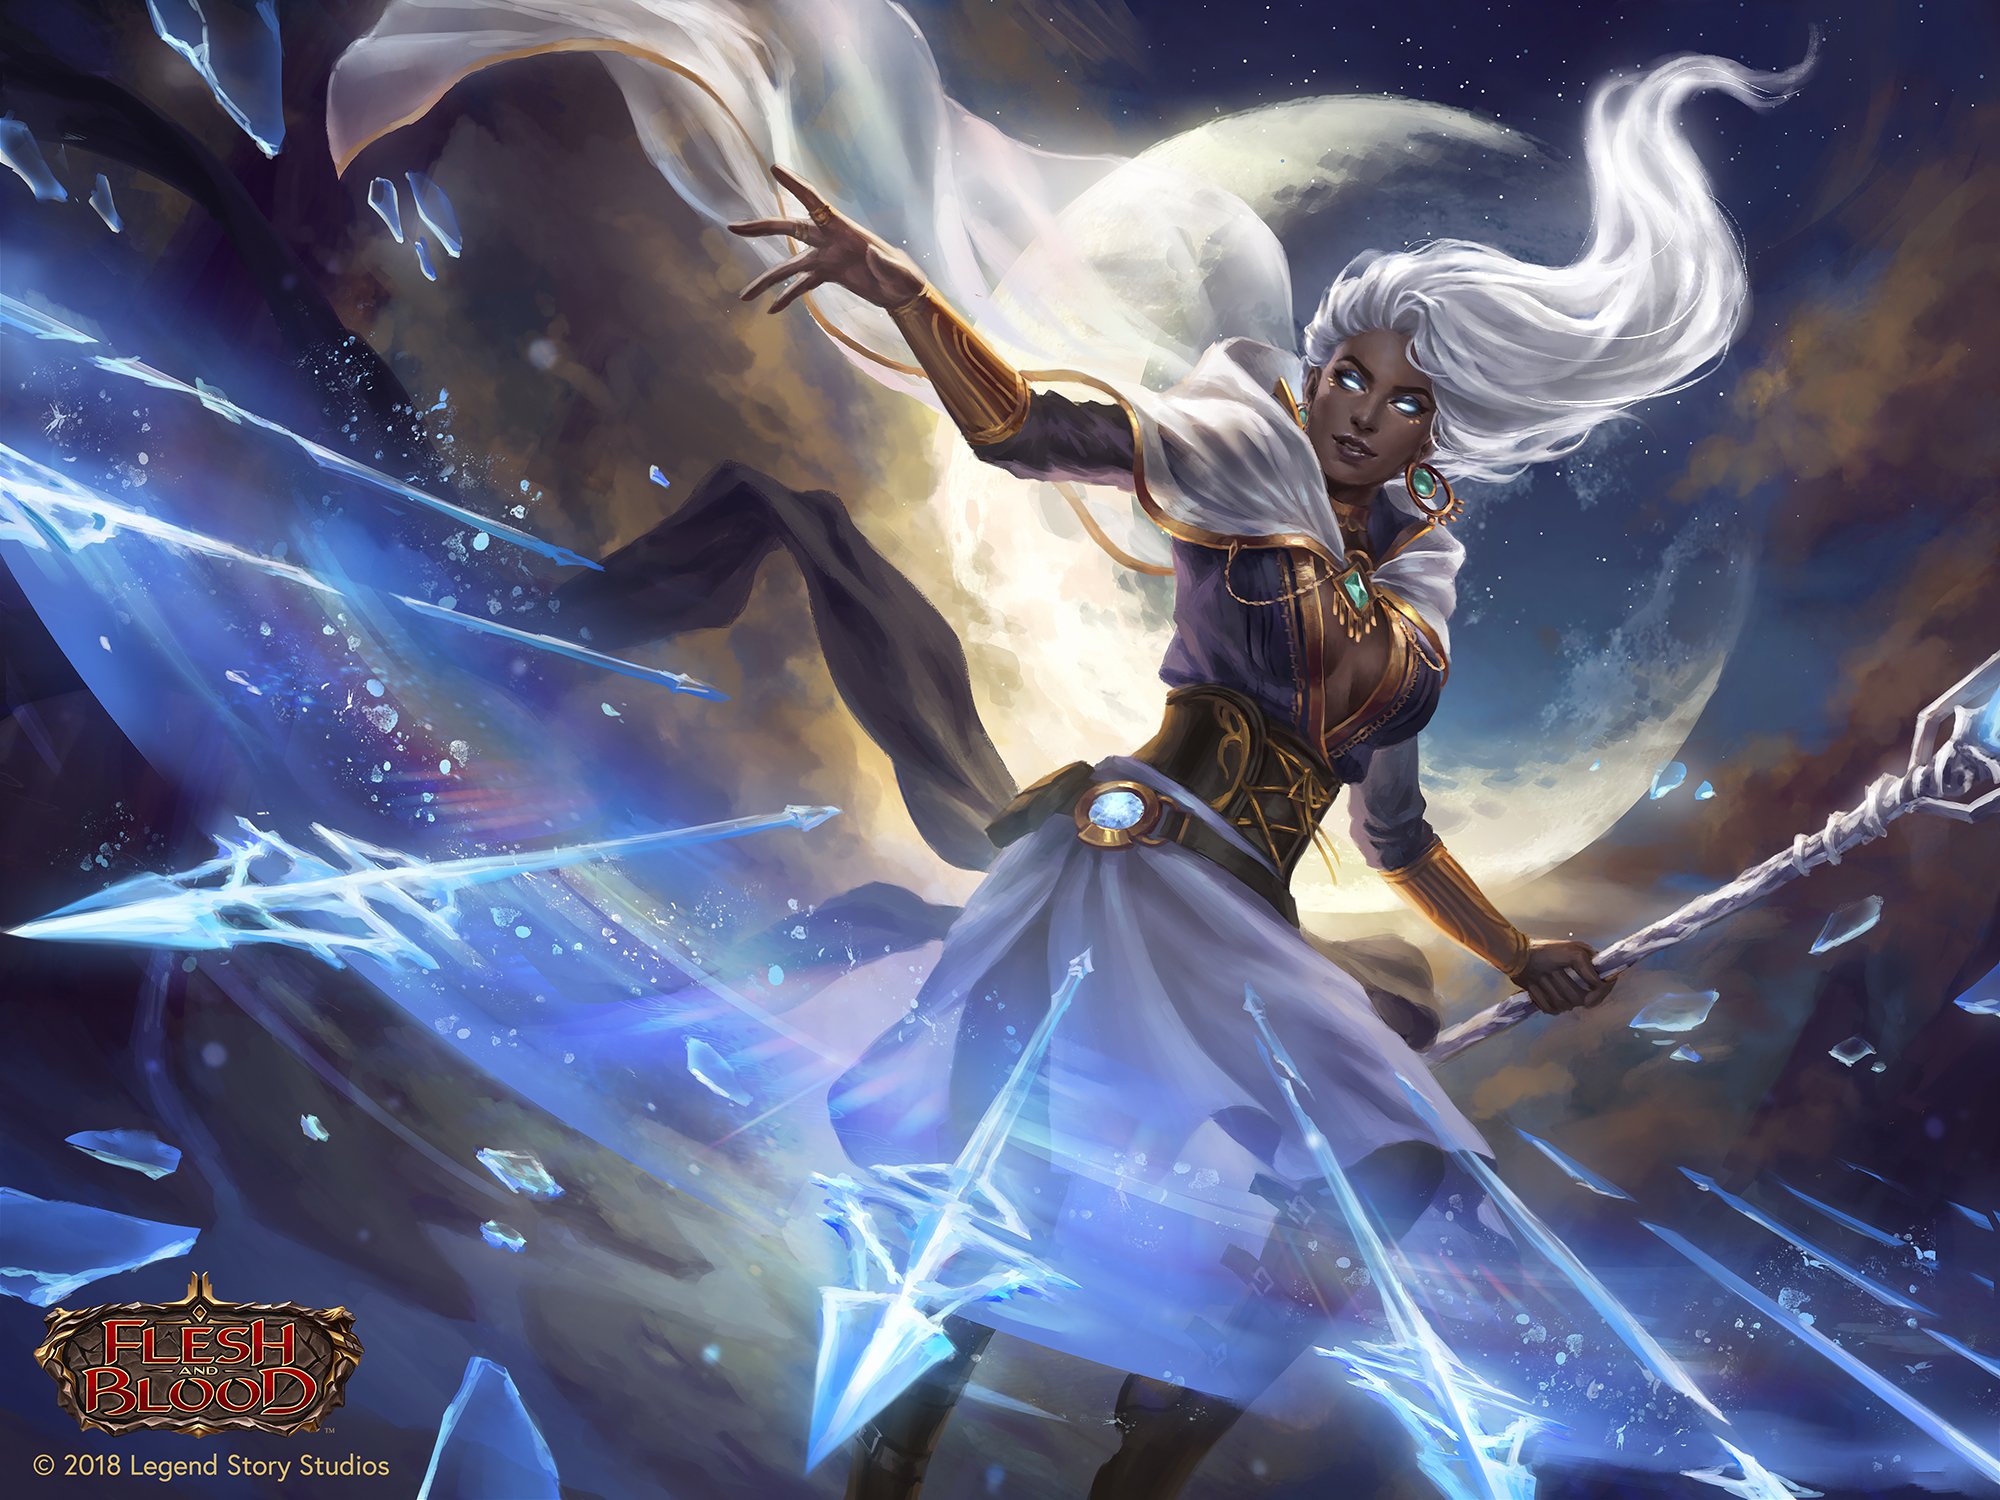 Immanuela Crovius Spears Of Surreality Work Done For Flesh And Blood Tcg Copyright By Legend Story Studios All Rights Reserved Artwork Legendstorystudios Digitalpainting Art Cardgame Illustration T Co 1q4l48xixg